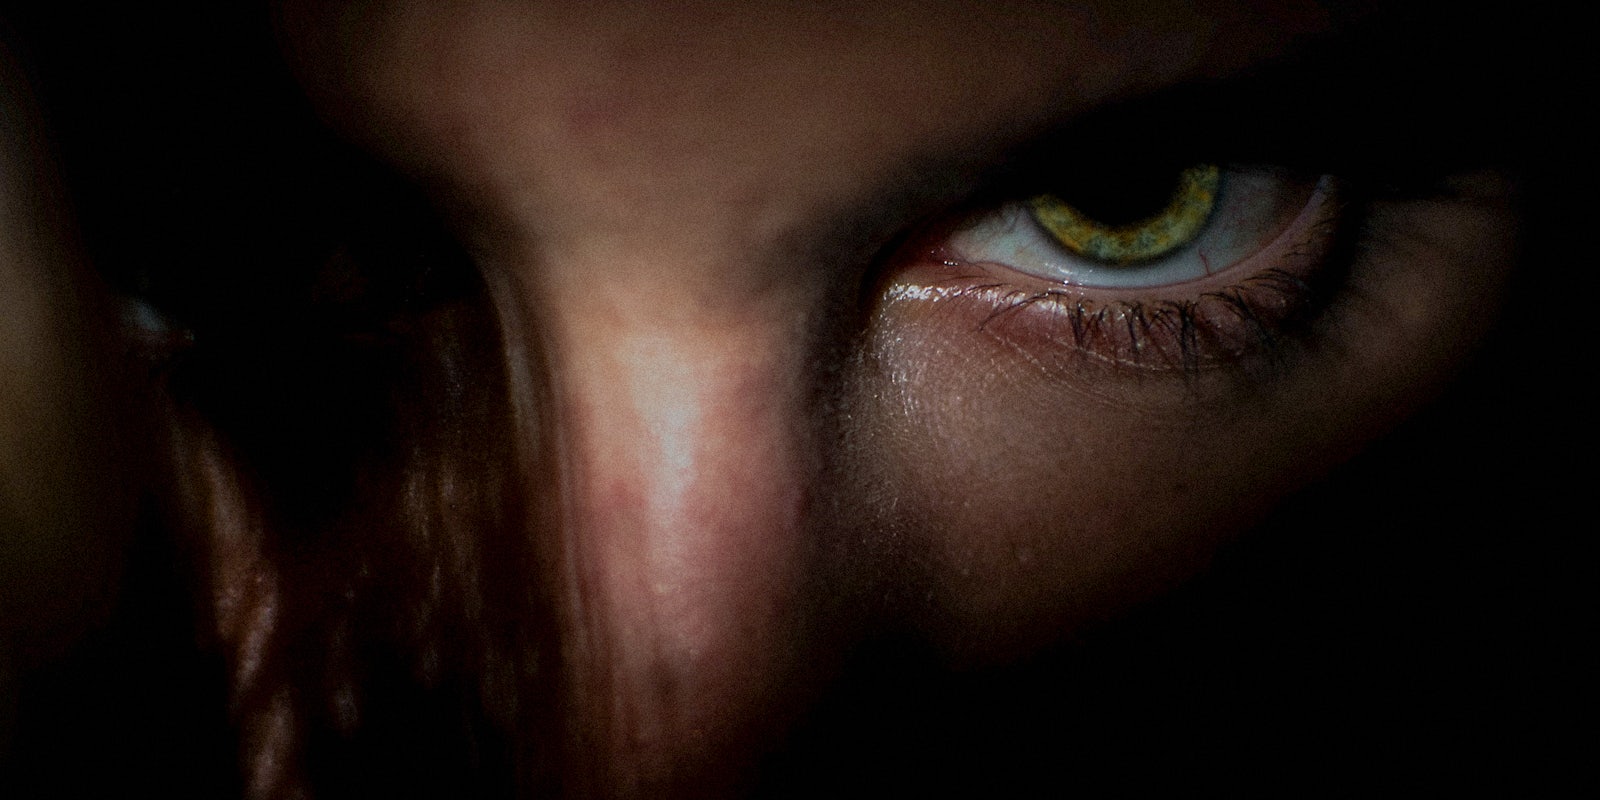 A close up of a woman's eyes.